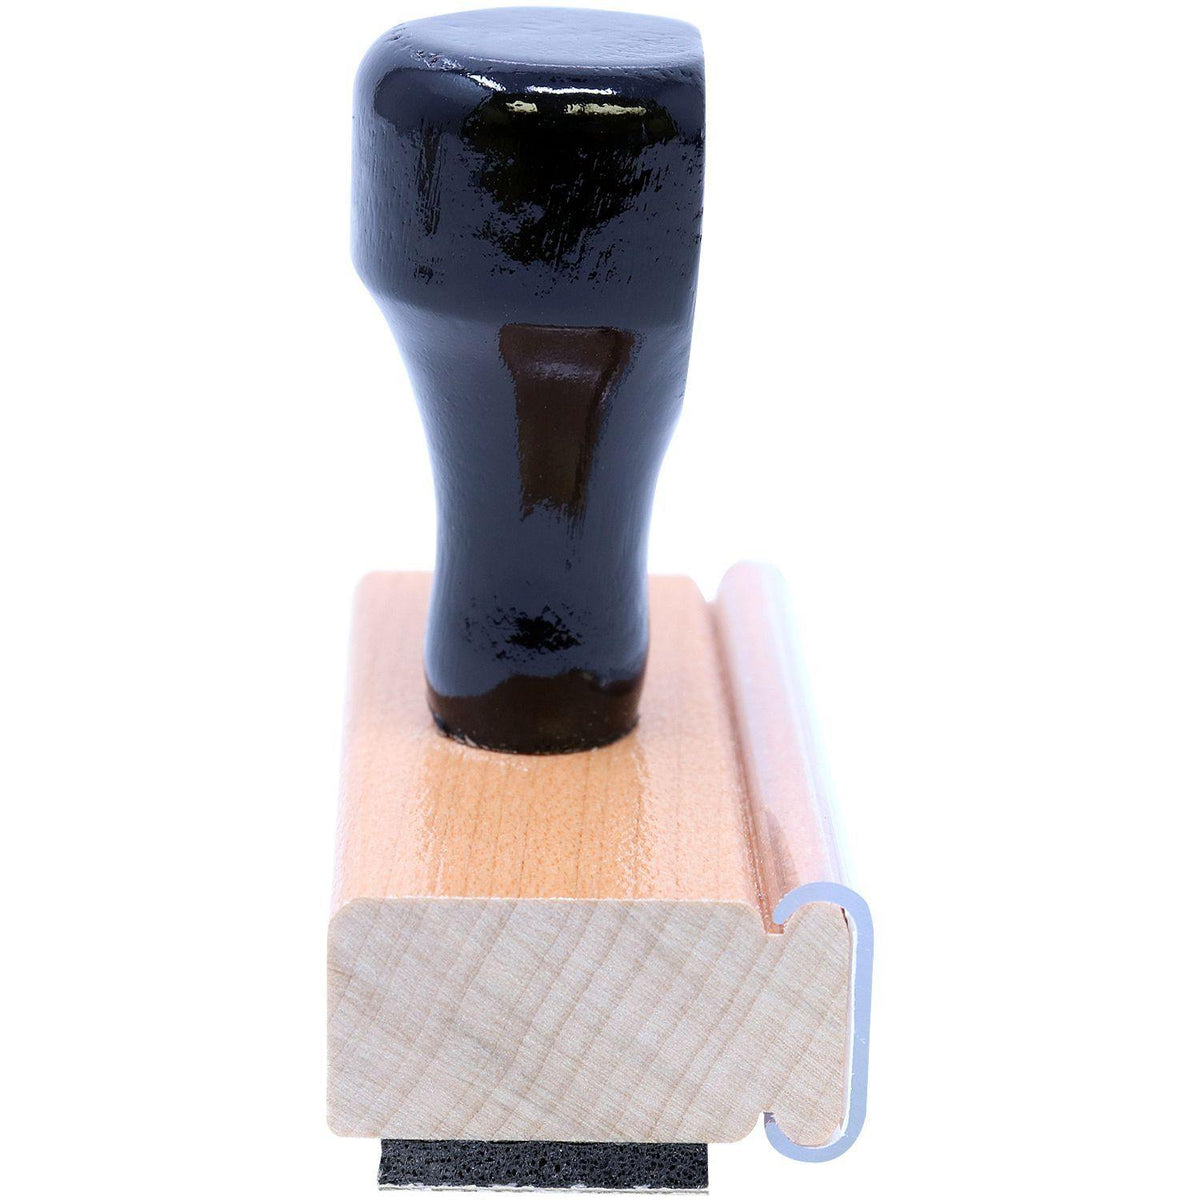 Privileged Rubber Stamp - Engineer Seal Stamps - Brand_Acorn, Impression Size_Small, Stamp Type_Regular Stamp, Type of Use_Business, Type of Use_Finance, Type of Use_Legal